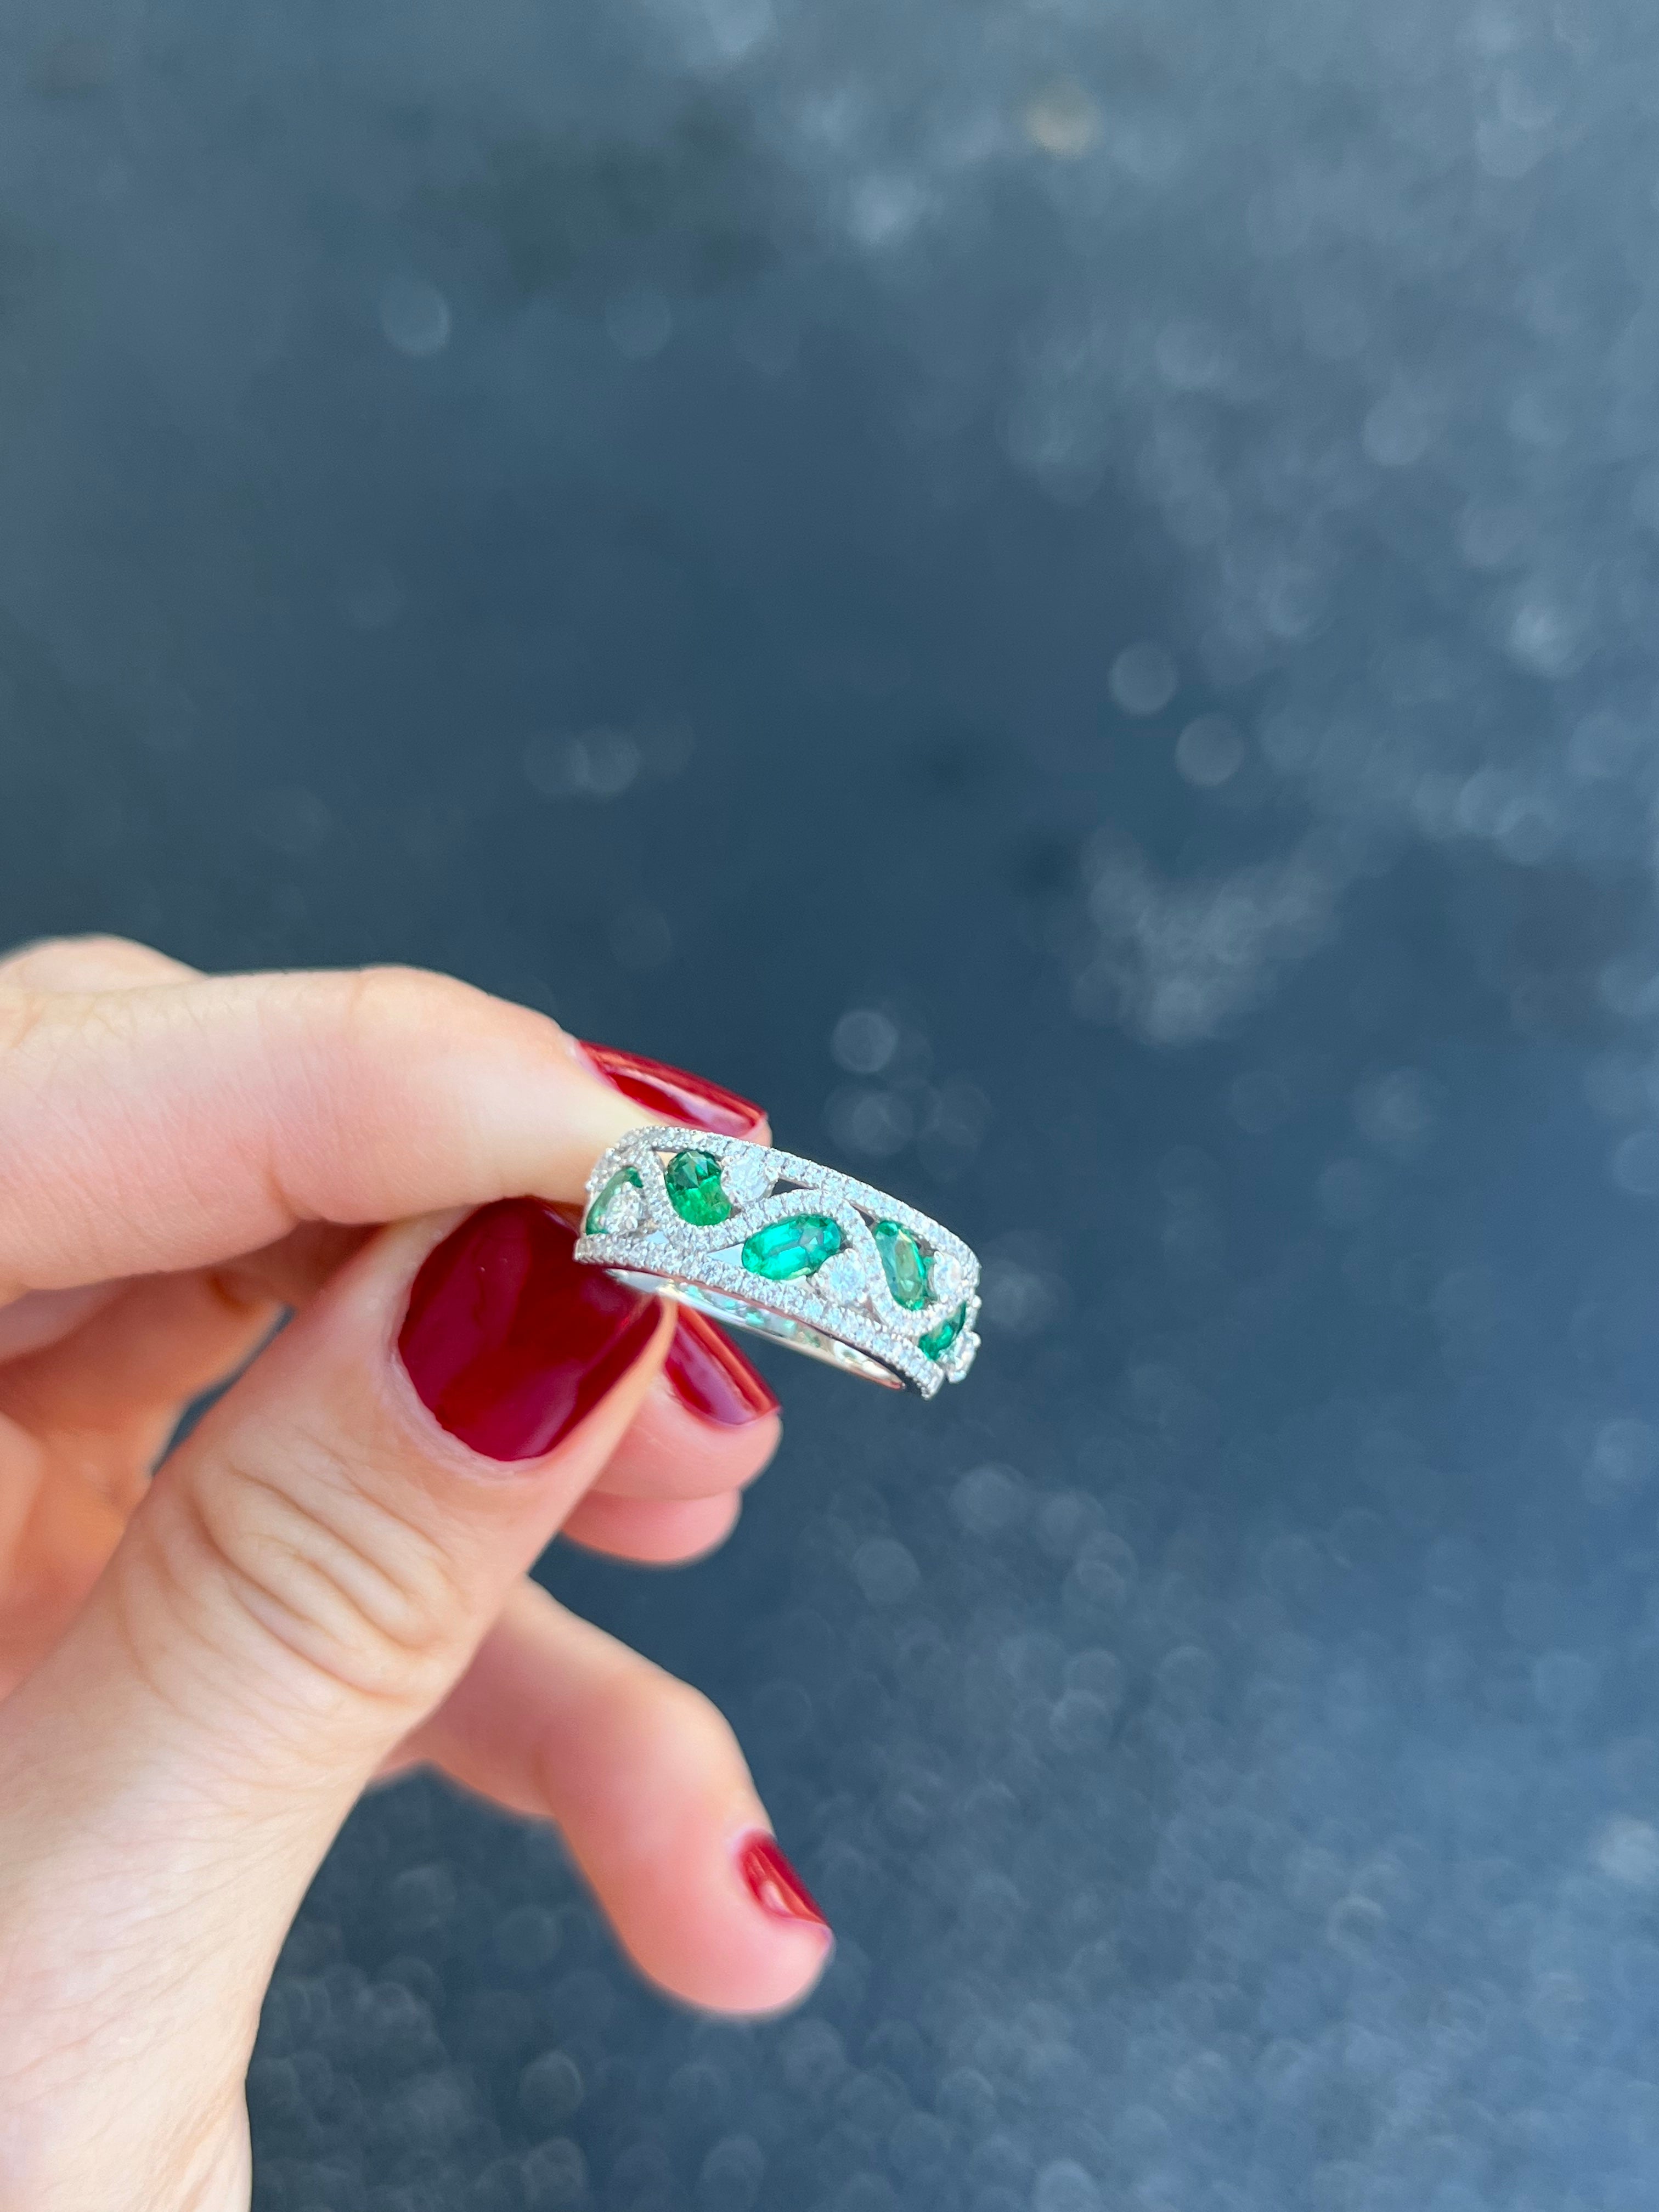 18K white gold, oval emerald and diamond band. 

Features
18K white gold
1.10 carat total weight emerald
.79 carat total weight diamonds
Ring size 6, can be sized up.
Can be sized down 1 size maximum.